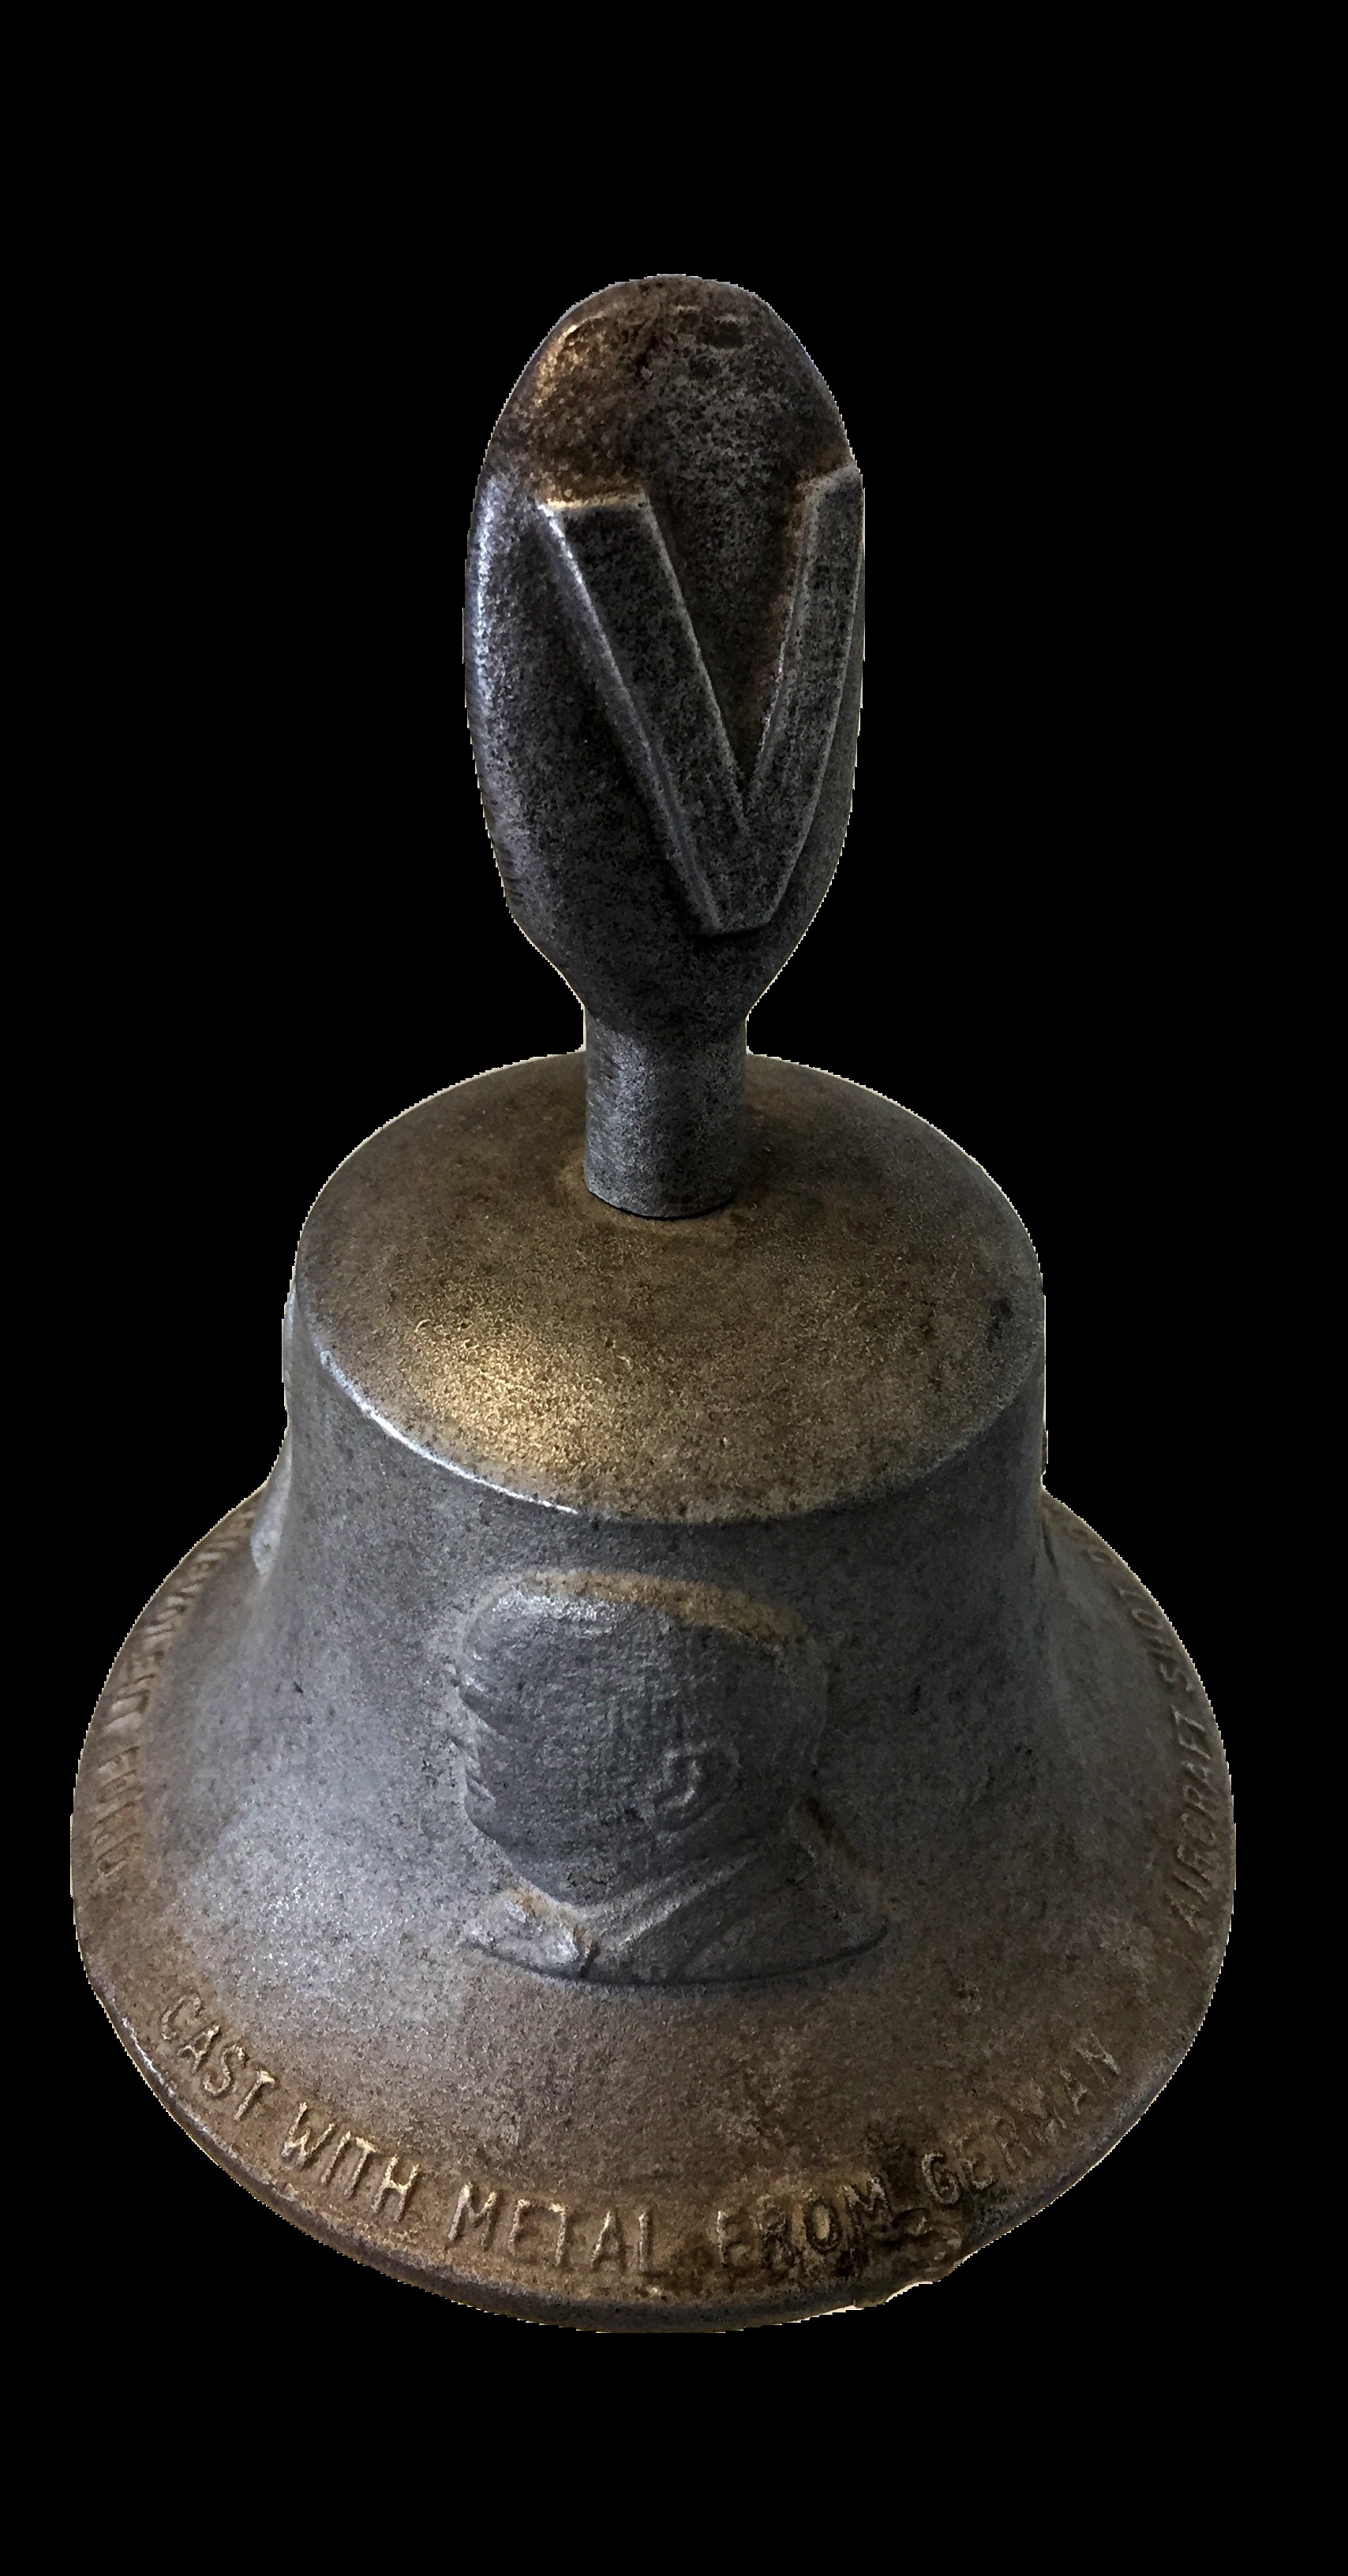 A Victory bell made out of aluminium alloy from German aircraft that had been destroyed during the Second World War. The bell, made in Buckinghamshire, features the heads of Churchill, Roosevelt and Stalin, plus a large V on the handle. Proceeds from